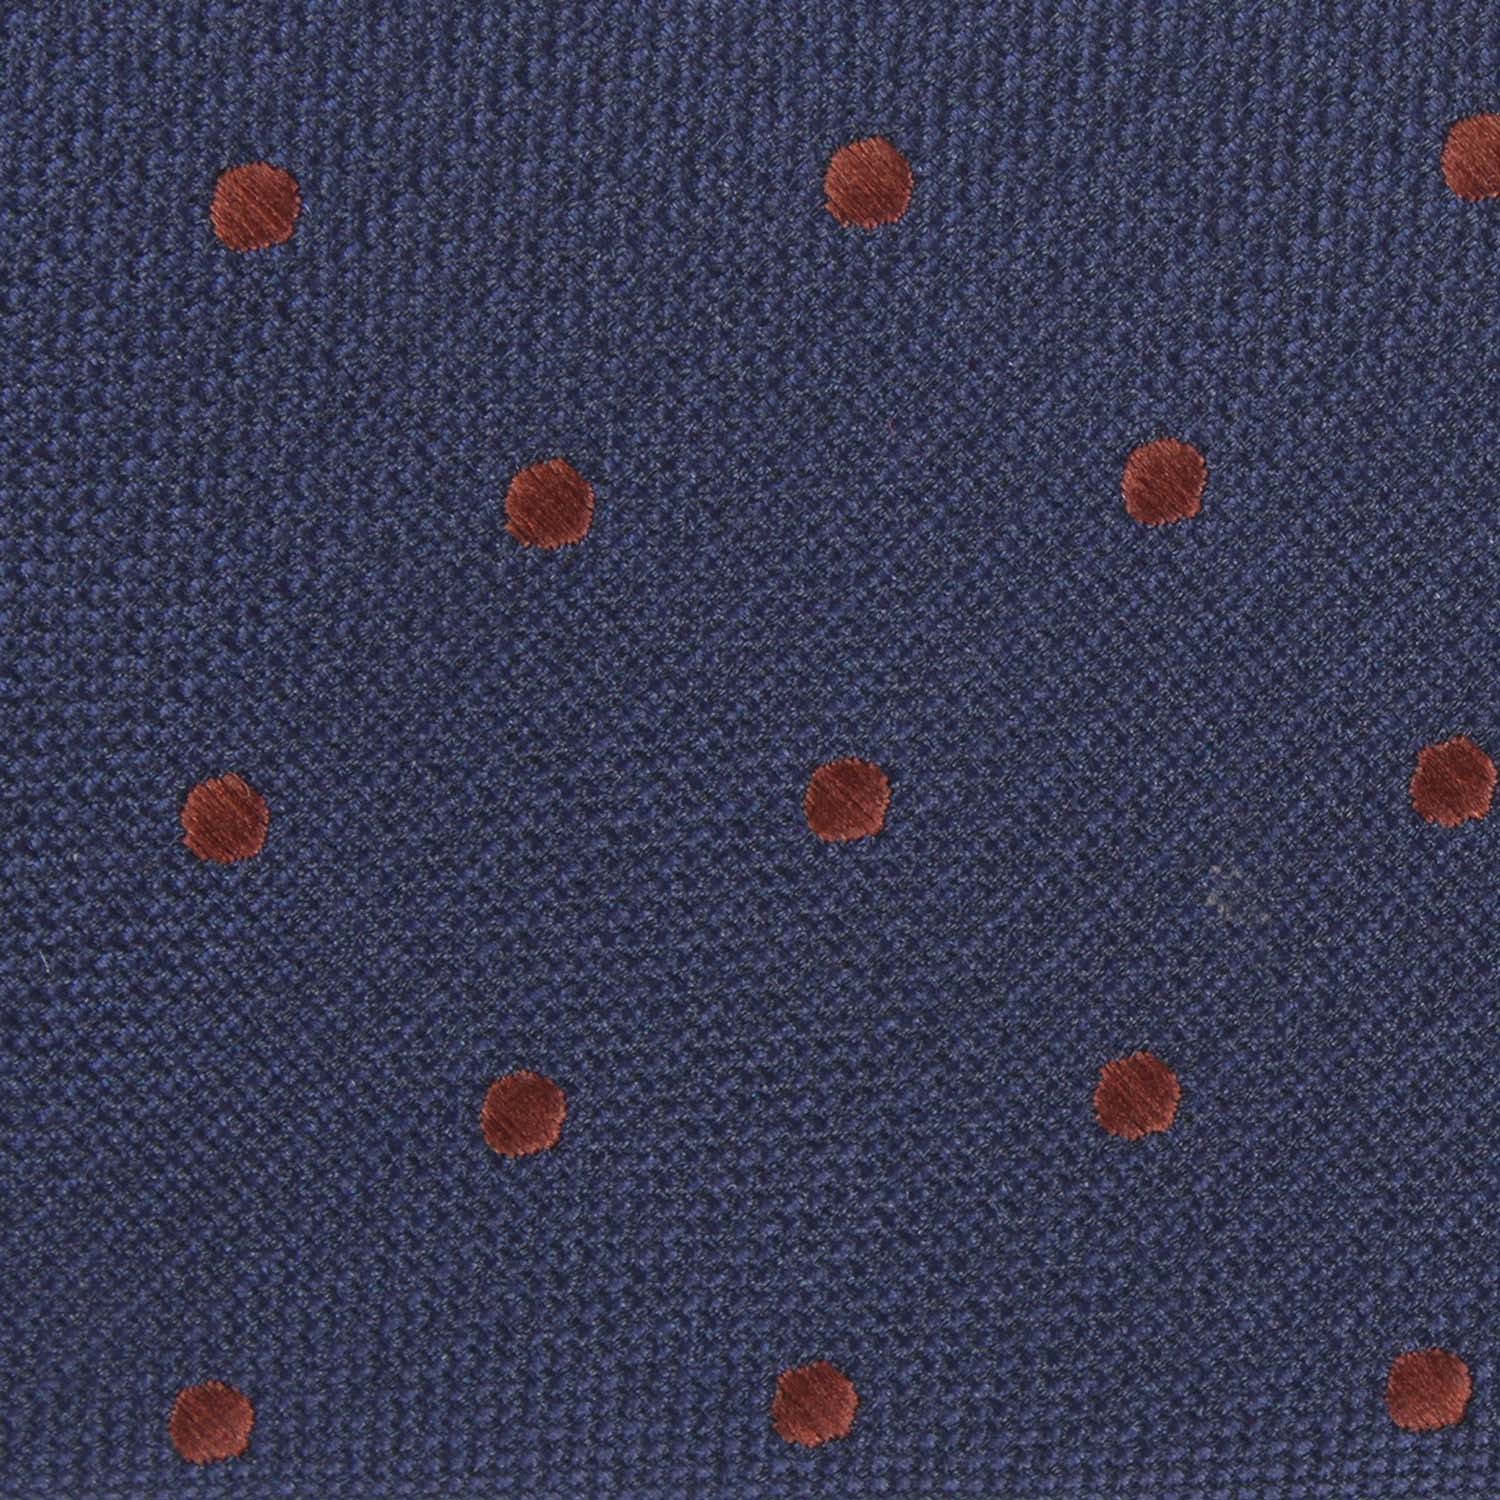 Navy Blue with Brown Polka Dots Fabric Skinny Tie M128